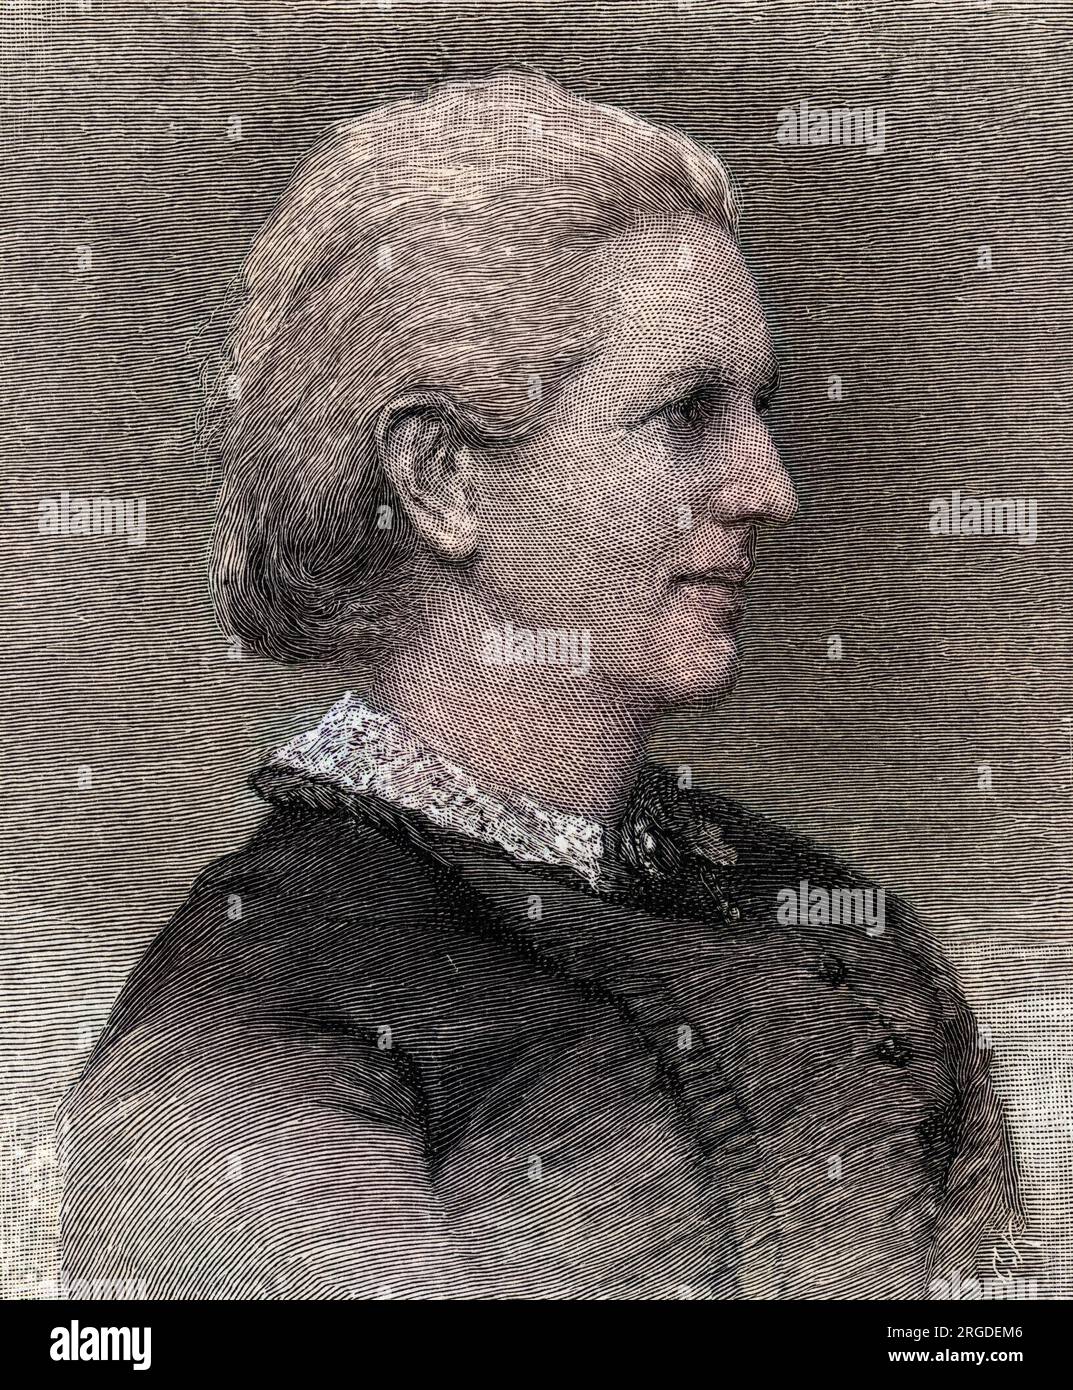 CHARLOTTE MARY YONGE writer, author of 'The heir of Redclyffe', 'The little duke', 'The daisy chain', 'The dove in the eagle's nest' and many more. Stock Photo